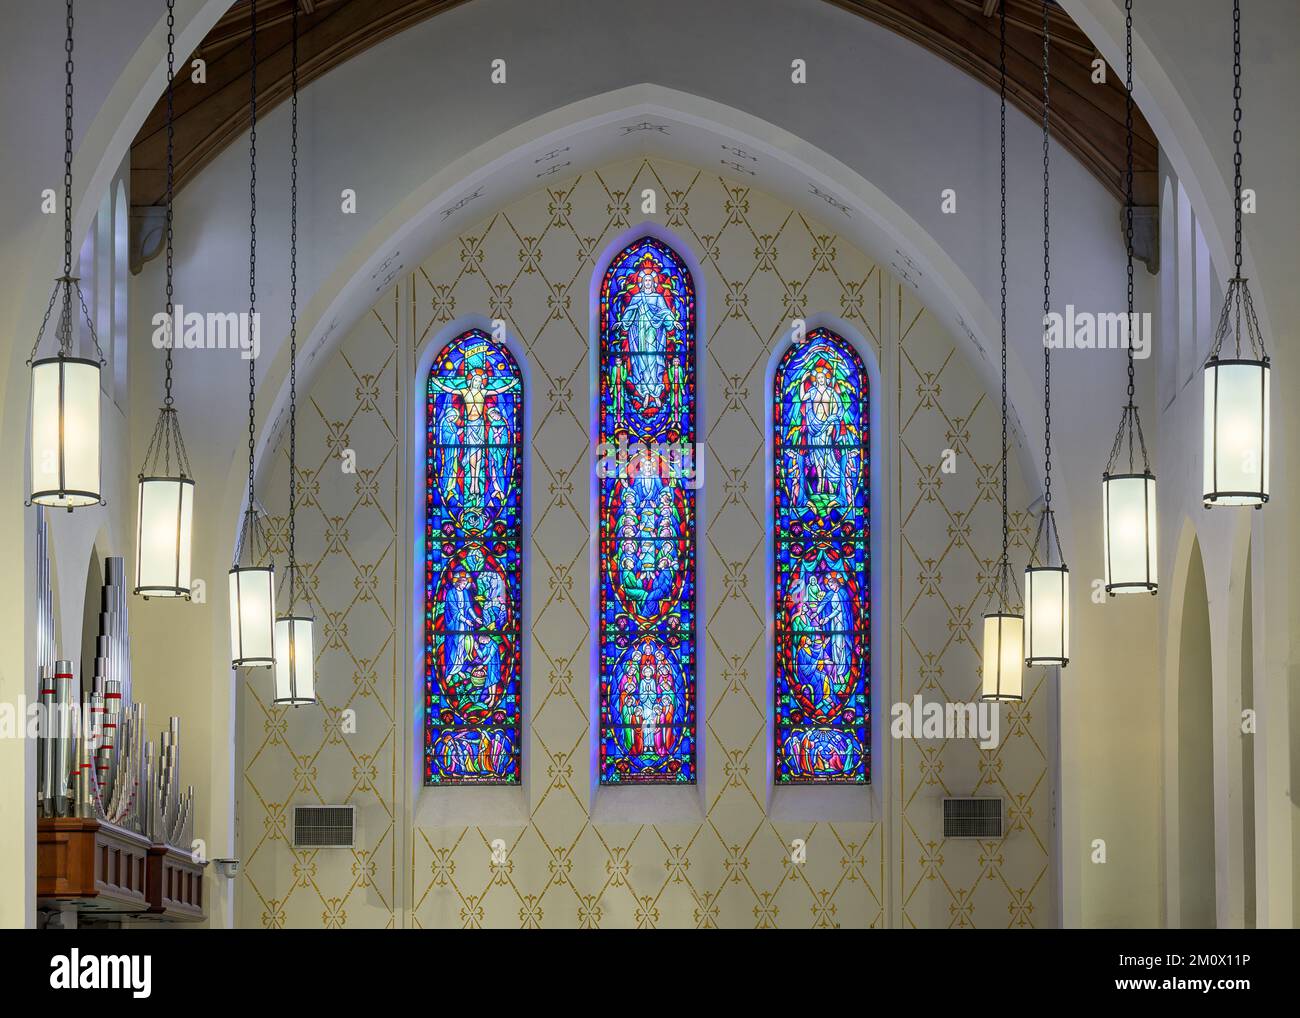 Three stained glass windows above the altar at the historic Cathedral of St. John in downtown Albuquerque, New Mexico Stock Photo